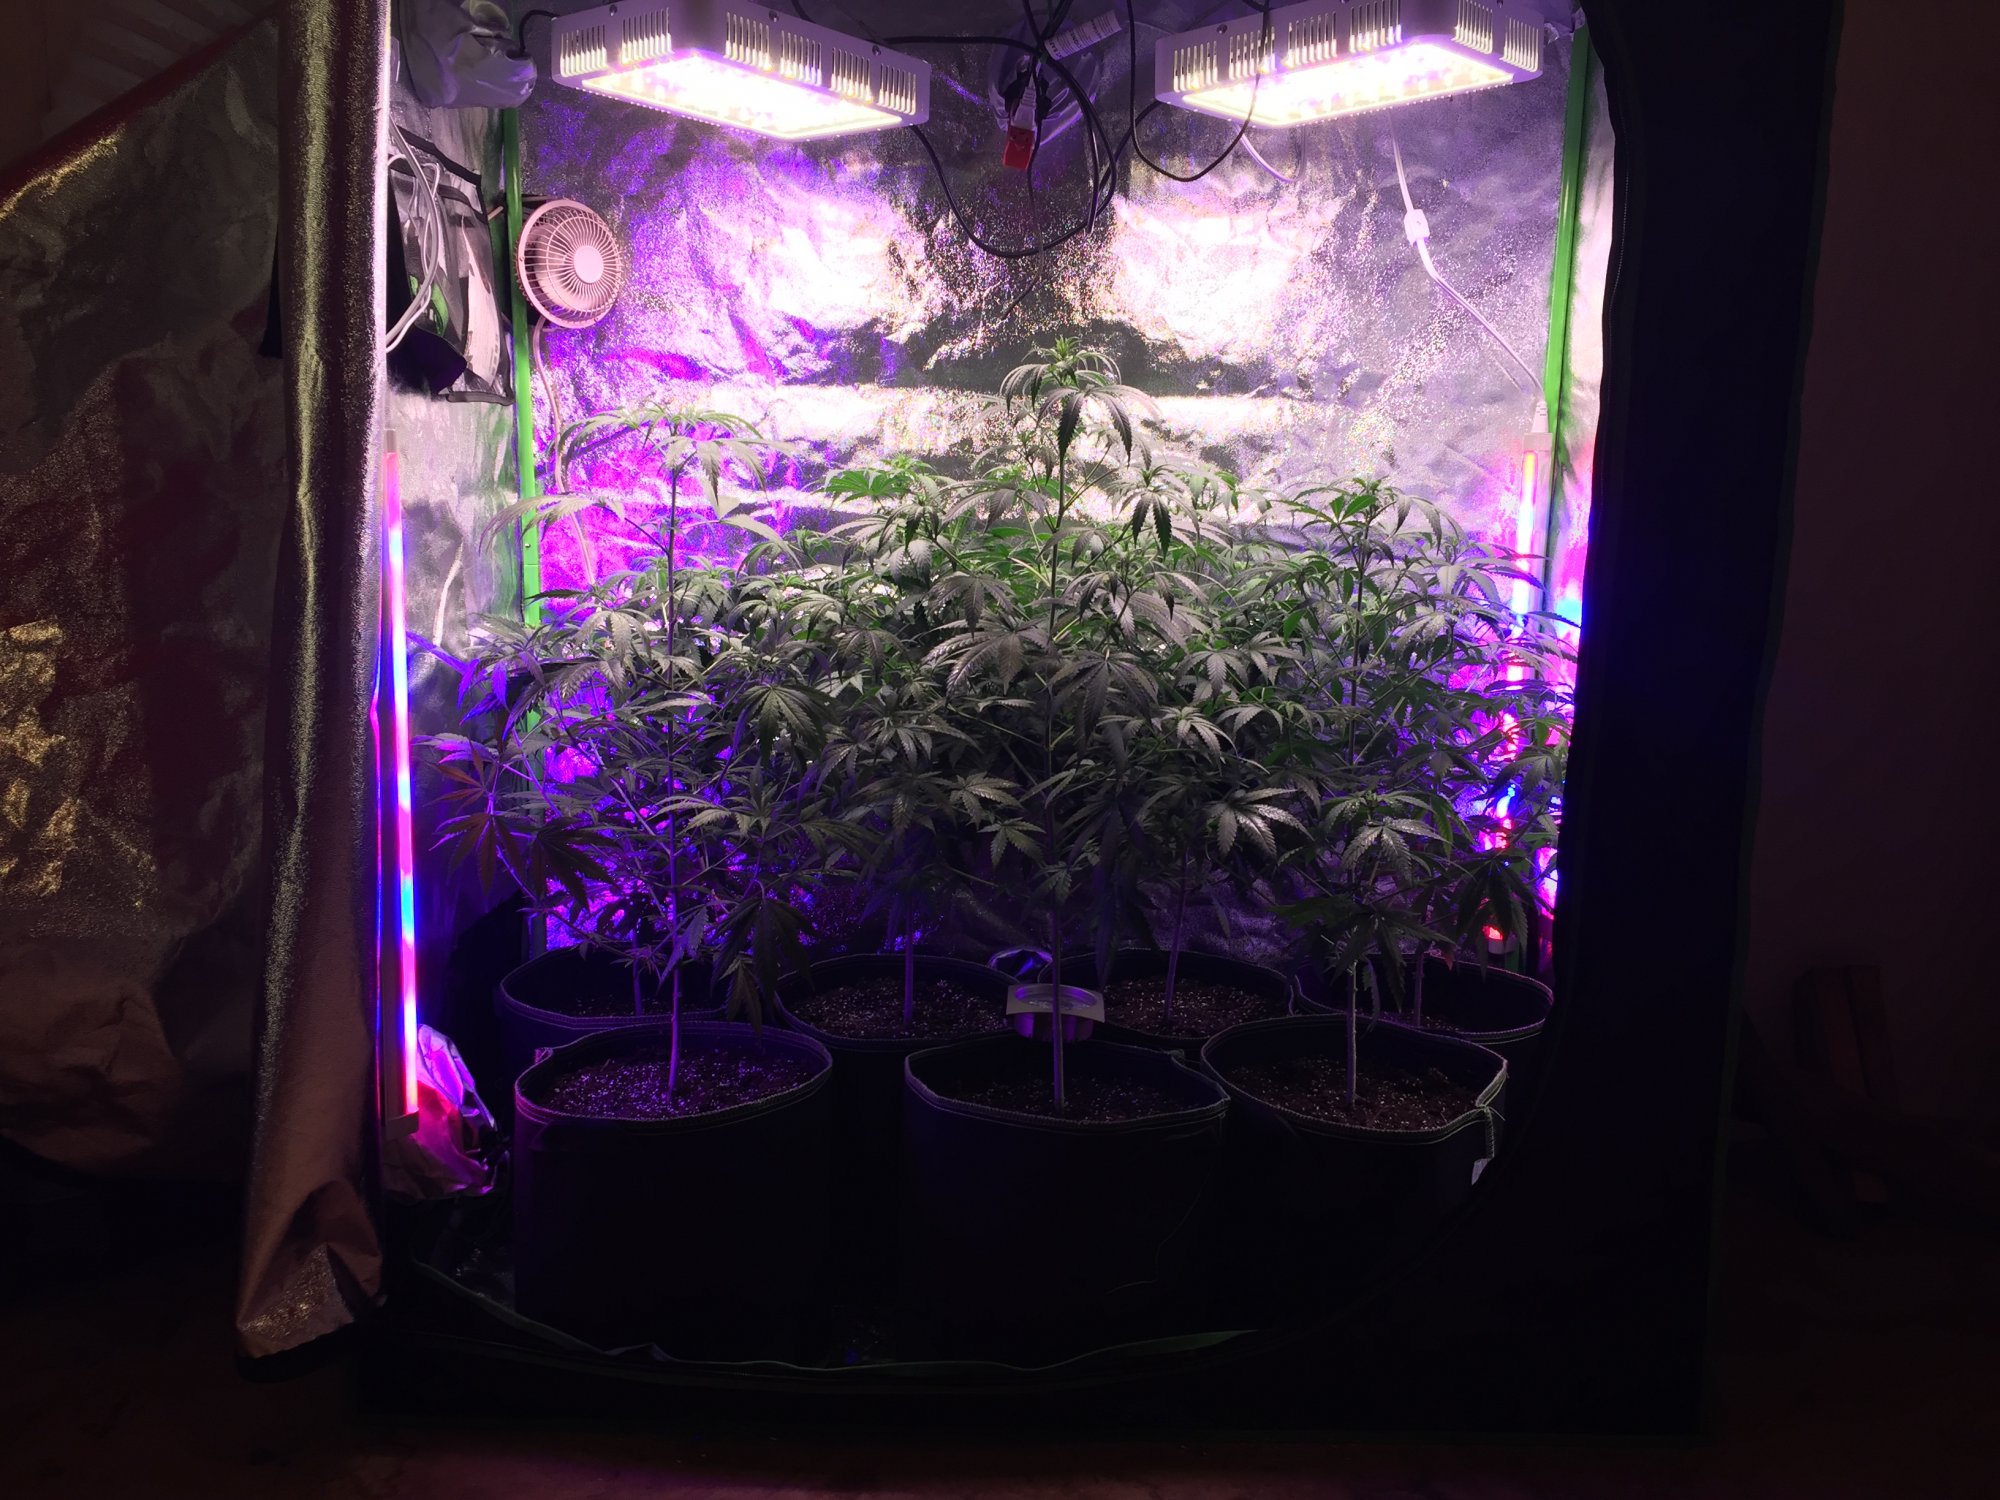 One week and two days into flower 2